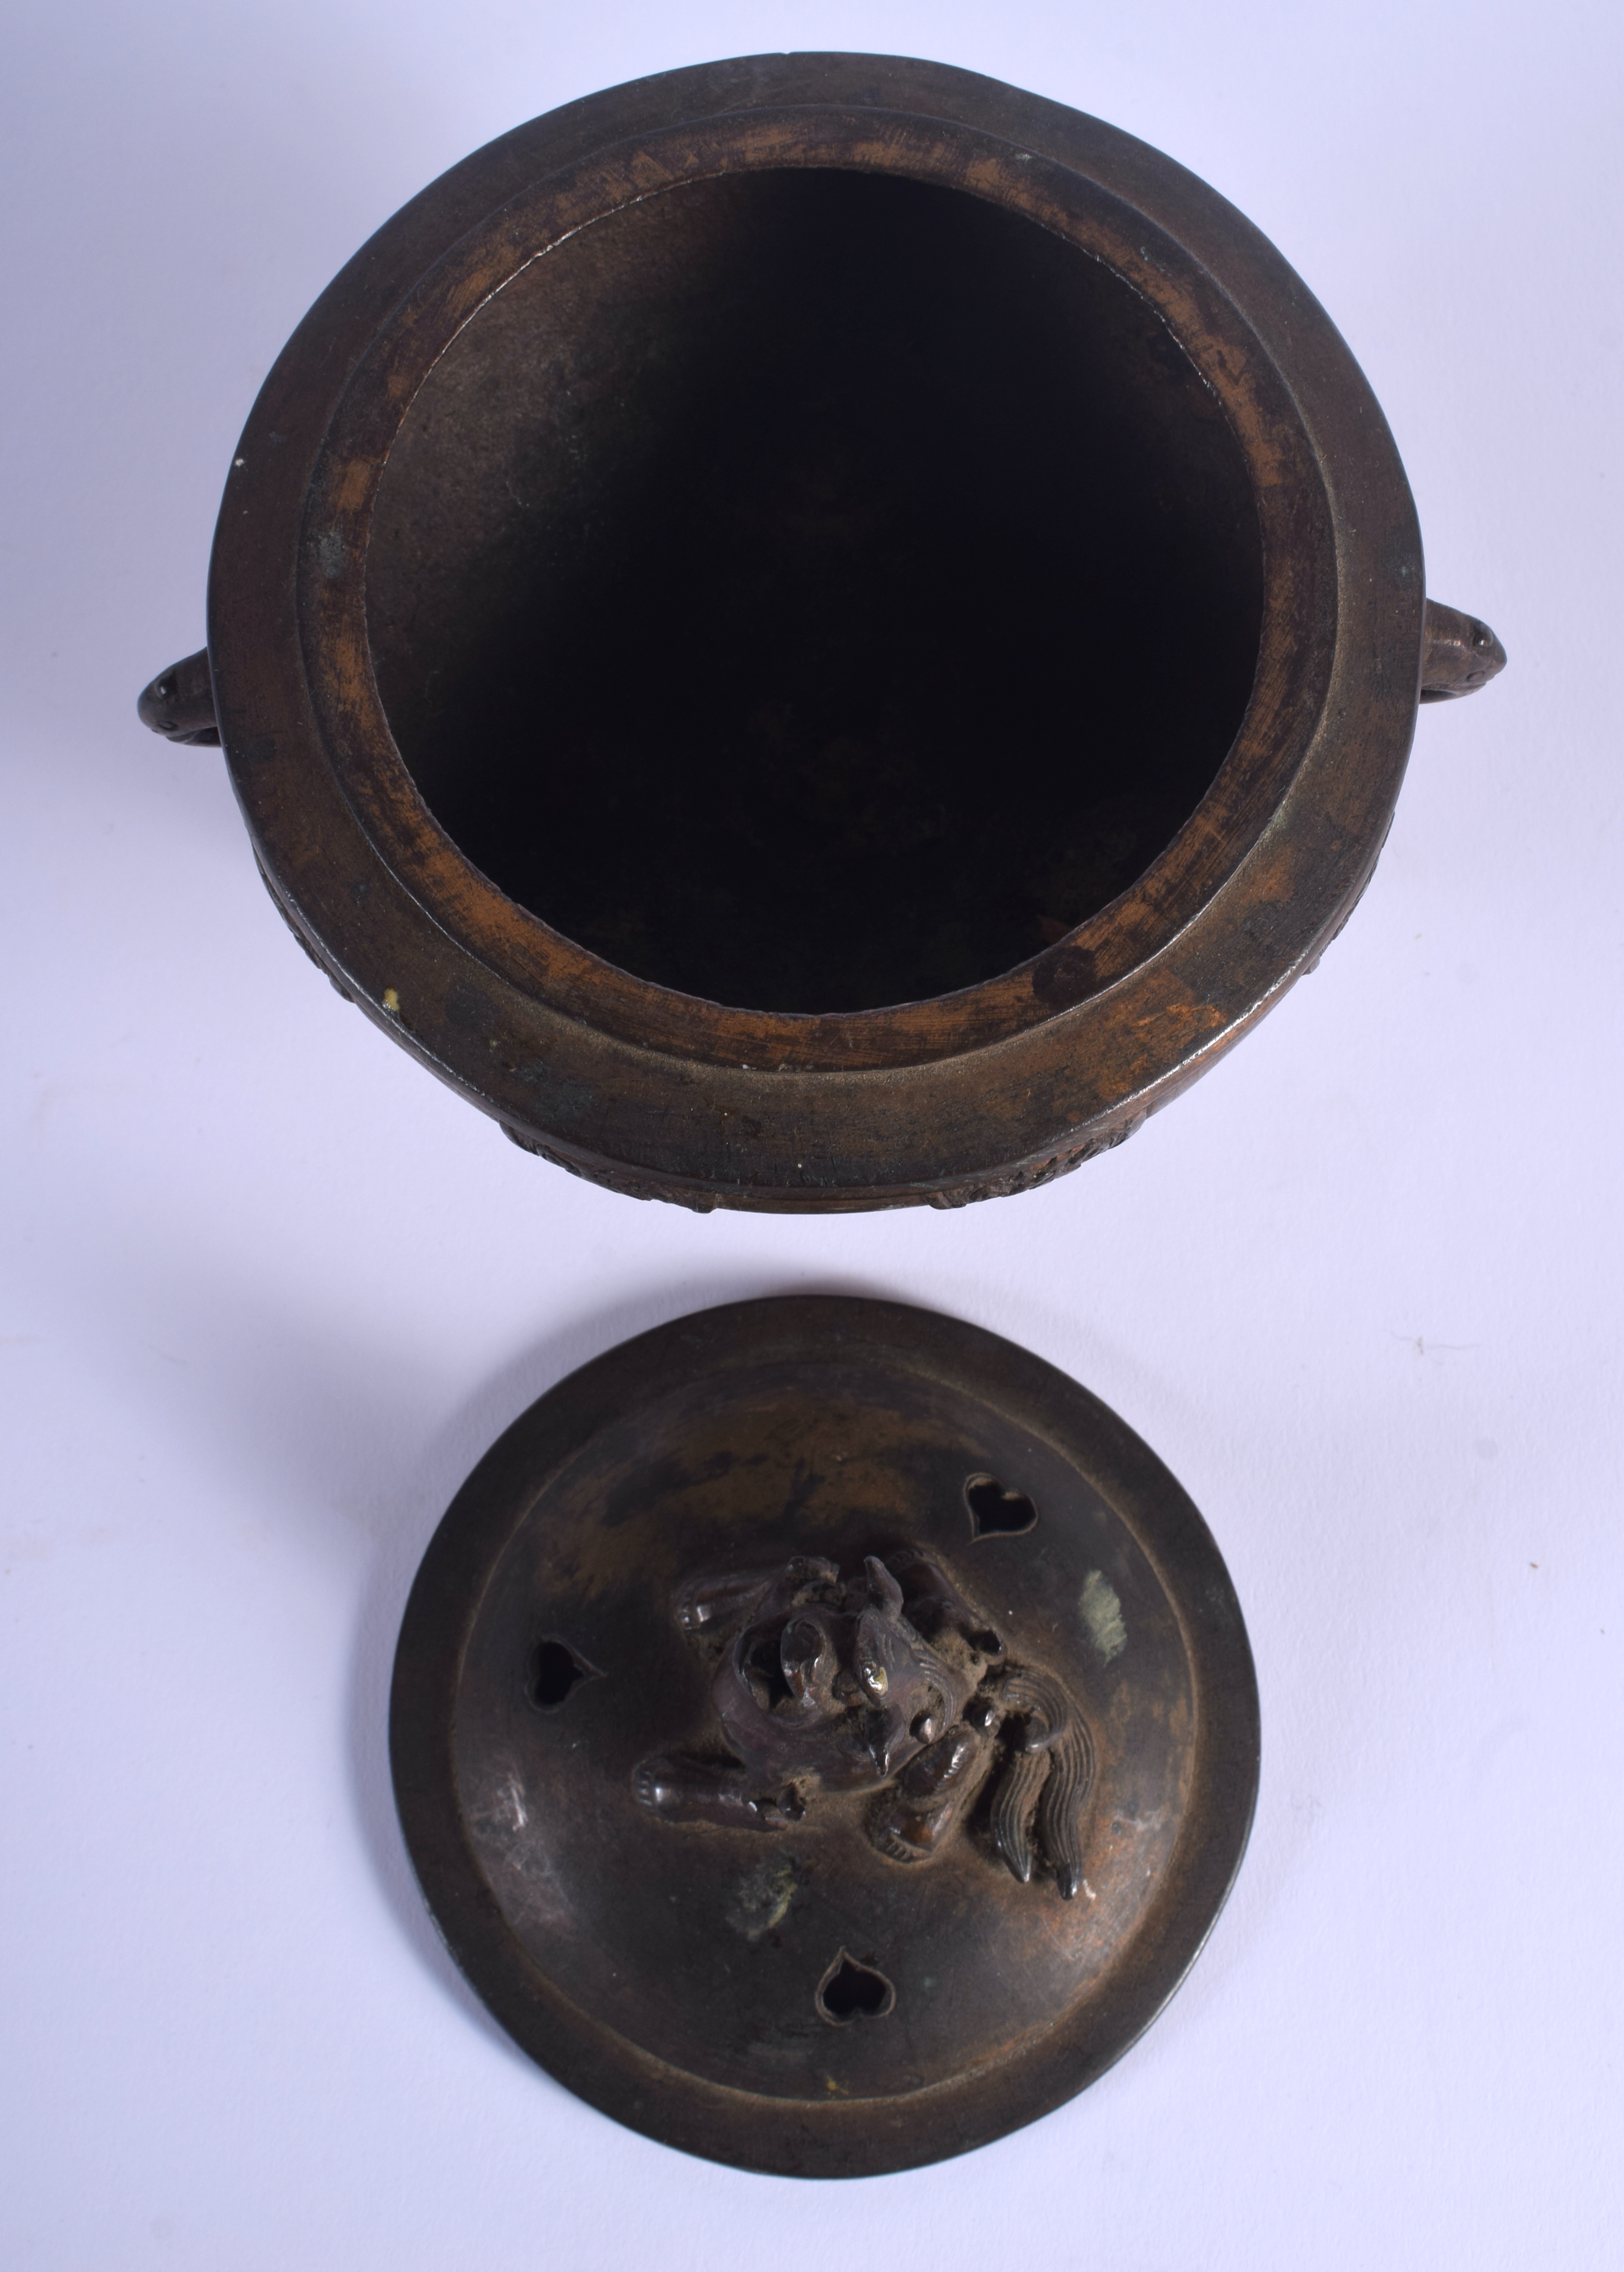 A 19TH CENTURY JAPANESE MEIJI PERIOD BRONZE CENSER AND COVER with foo dog finial. 12 cm x 10 cm. - Image 3 of 4